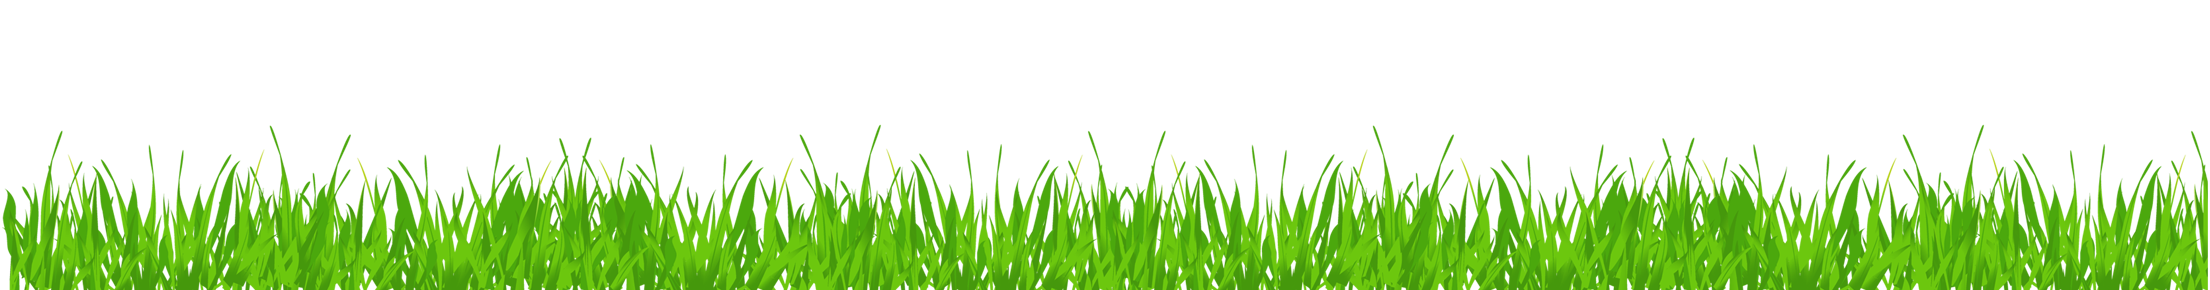 Download PNG image - Lawn Grass Download PNG Image 